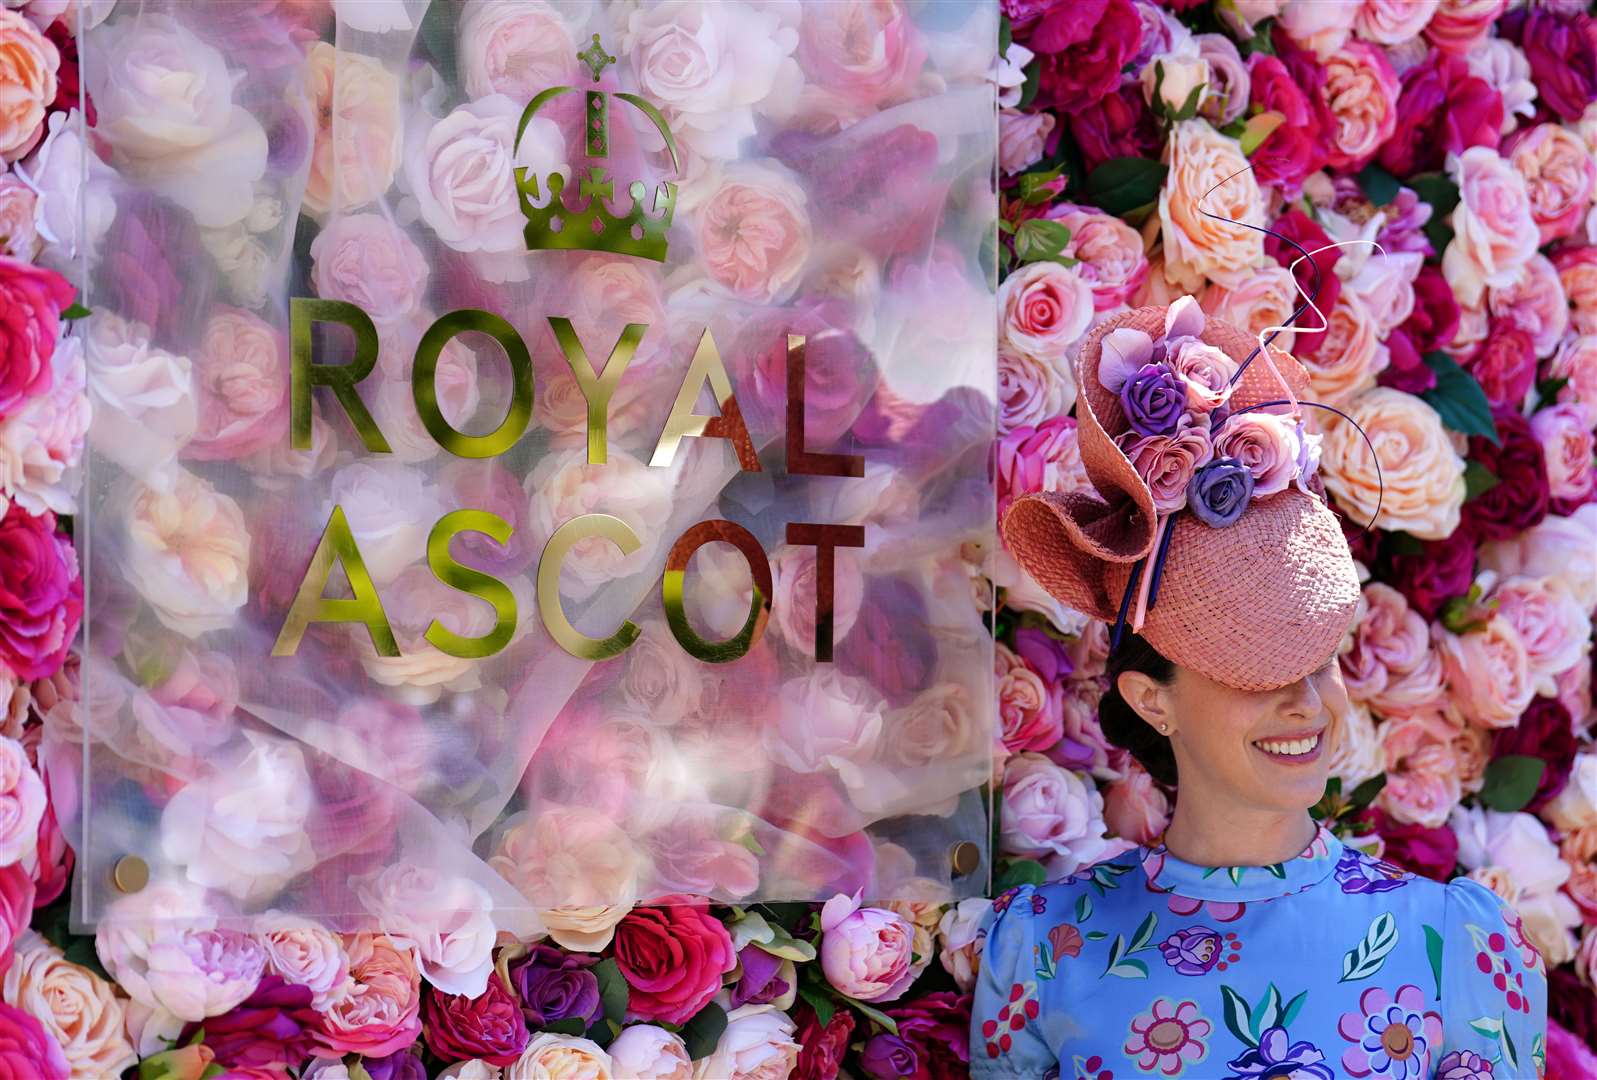 A racegoer shows off her hat on the first day of Royal Ascot (David Davies/PA)